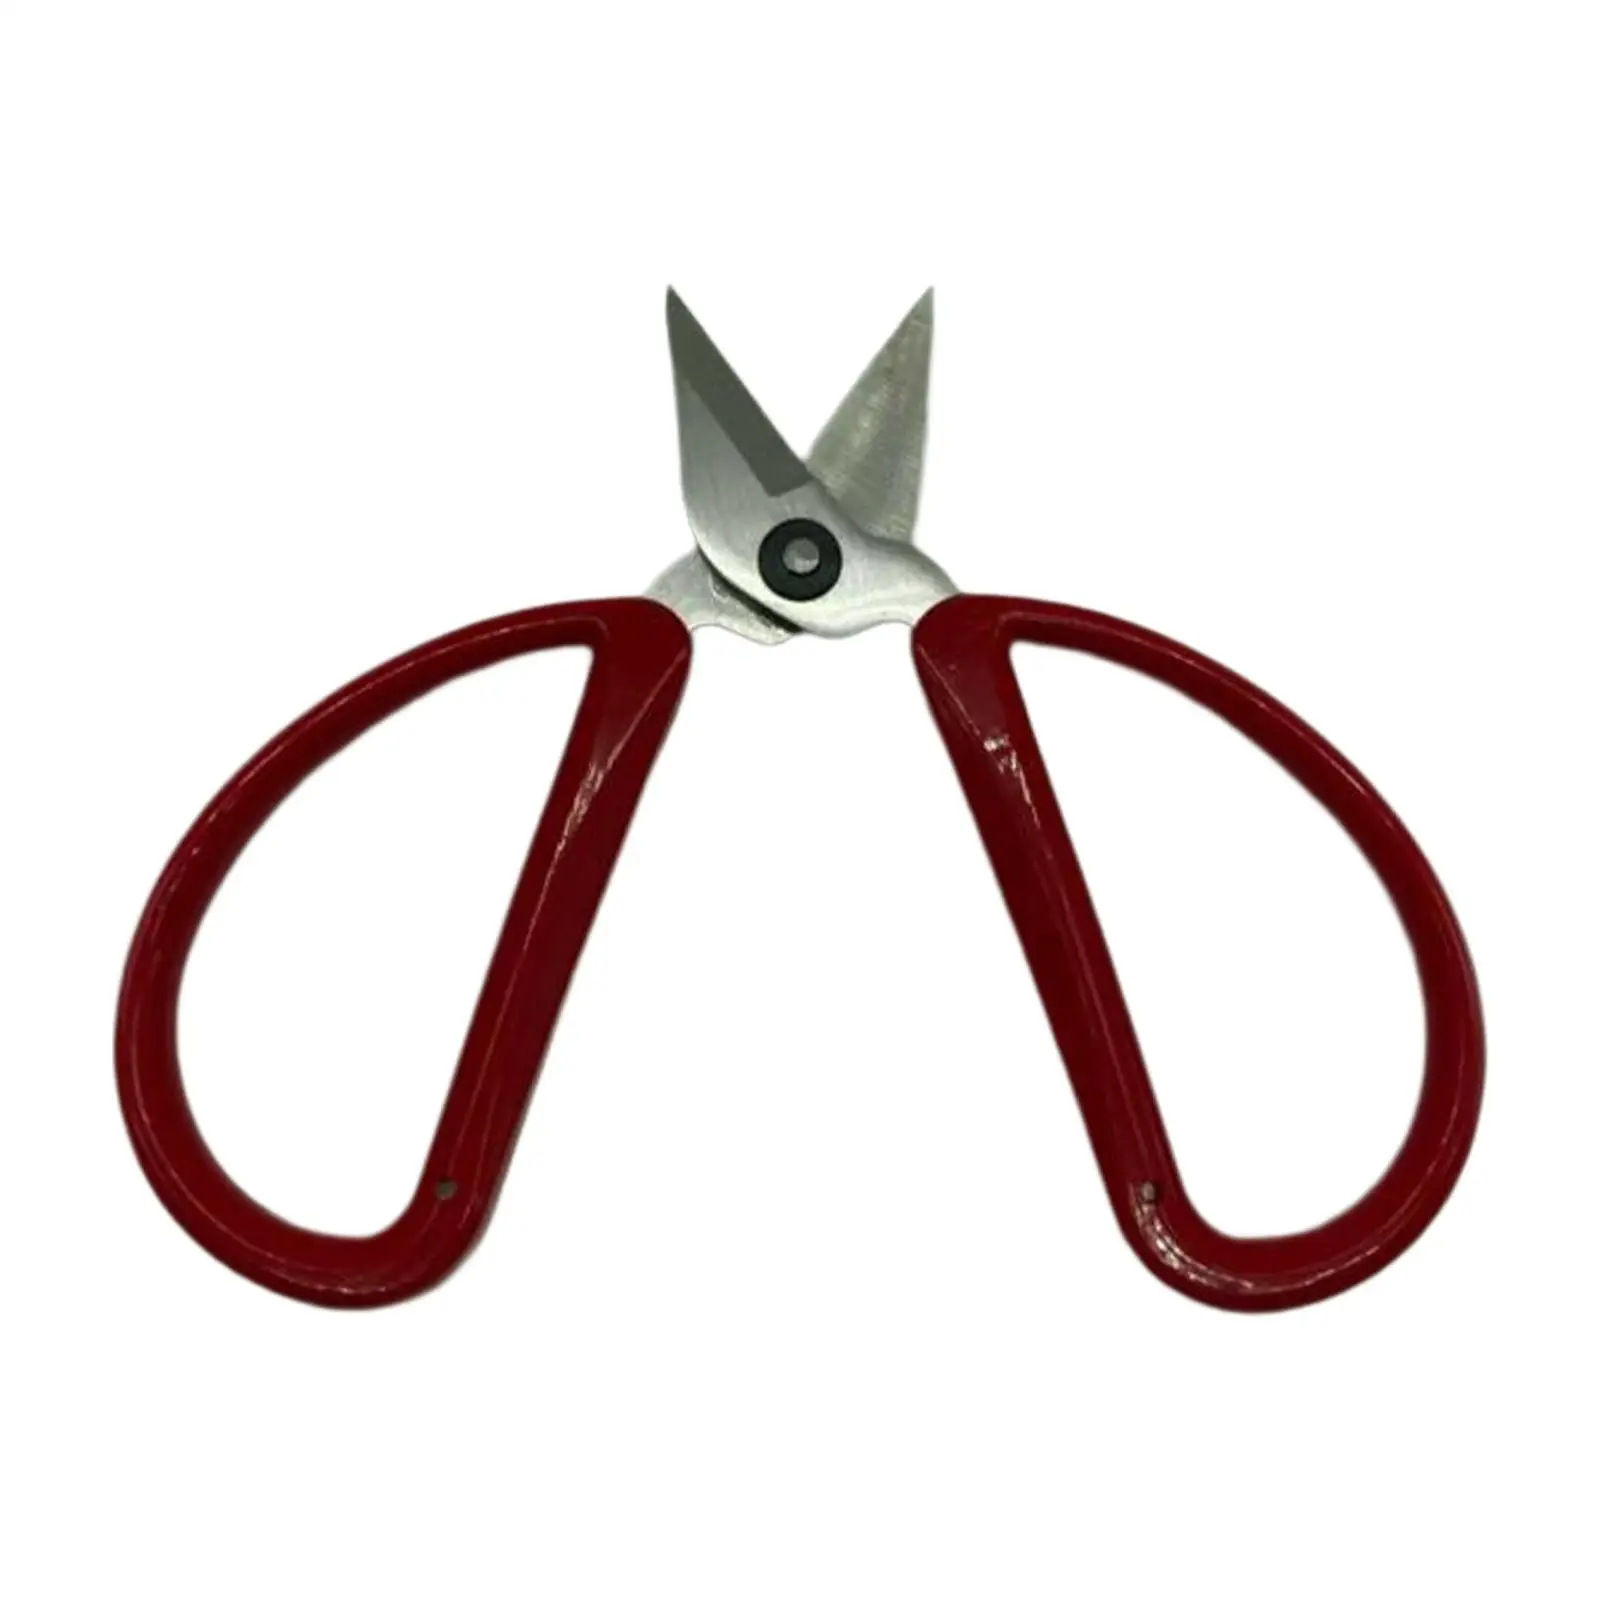 Tennis Racket Wire Cutter Precision Compact Diagonal Cutting Scissors for DIY Model Making Electronic Industry Repair Trimming